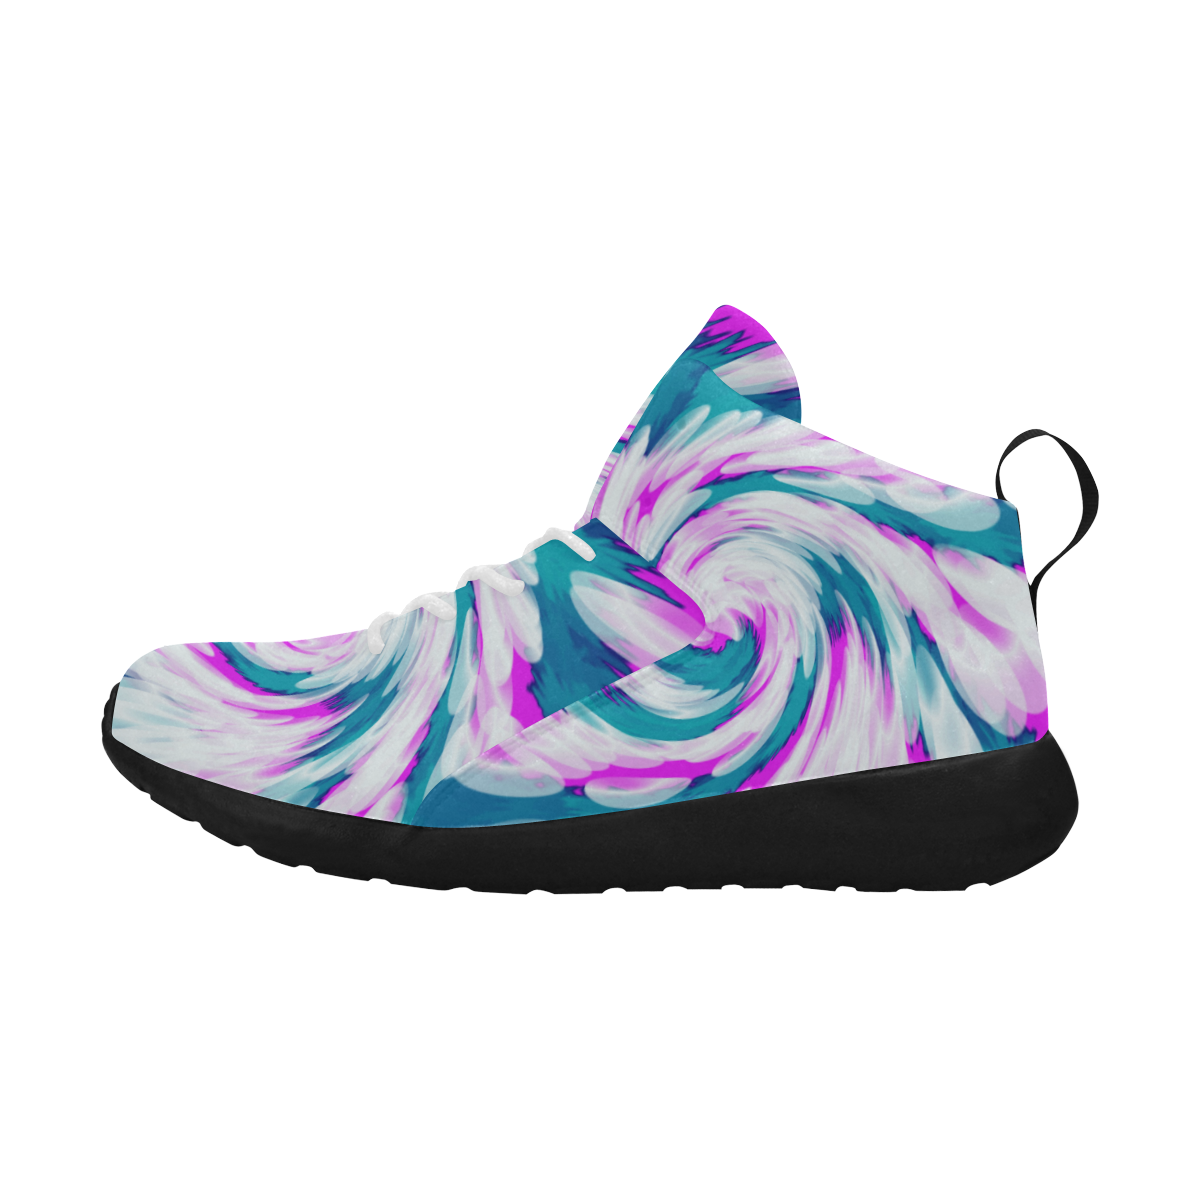 Turquoise Pink Tie Dye Swirl Abstract Women's Chukka Training Shoes/Large Size (Model 57502)